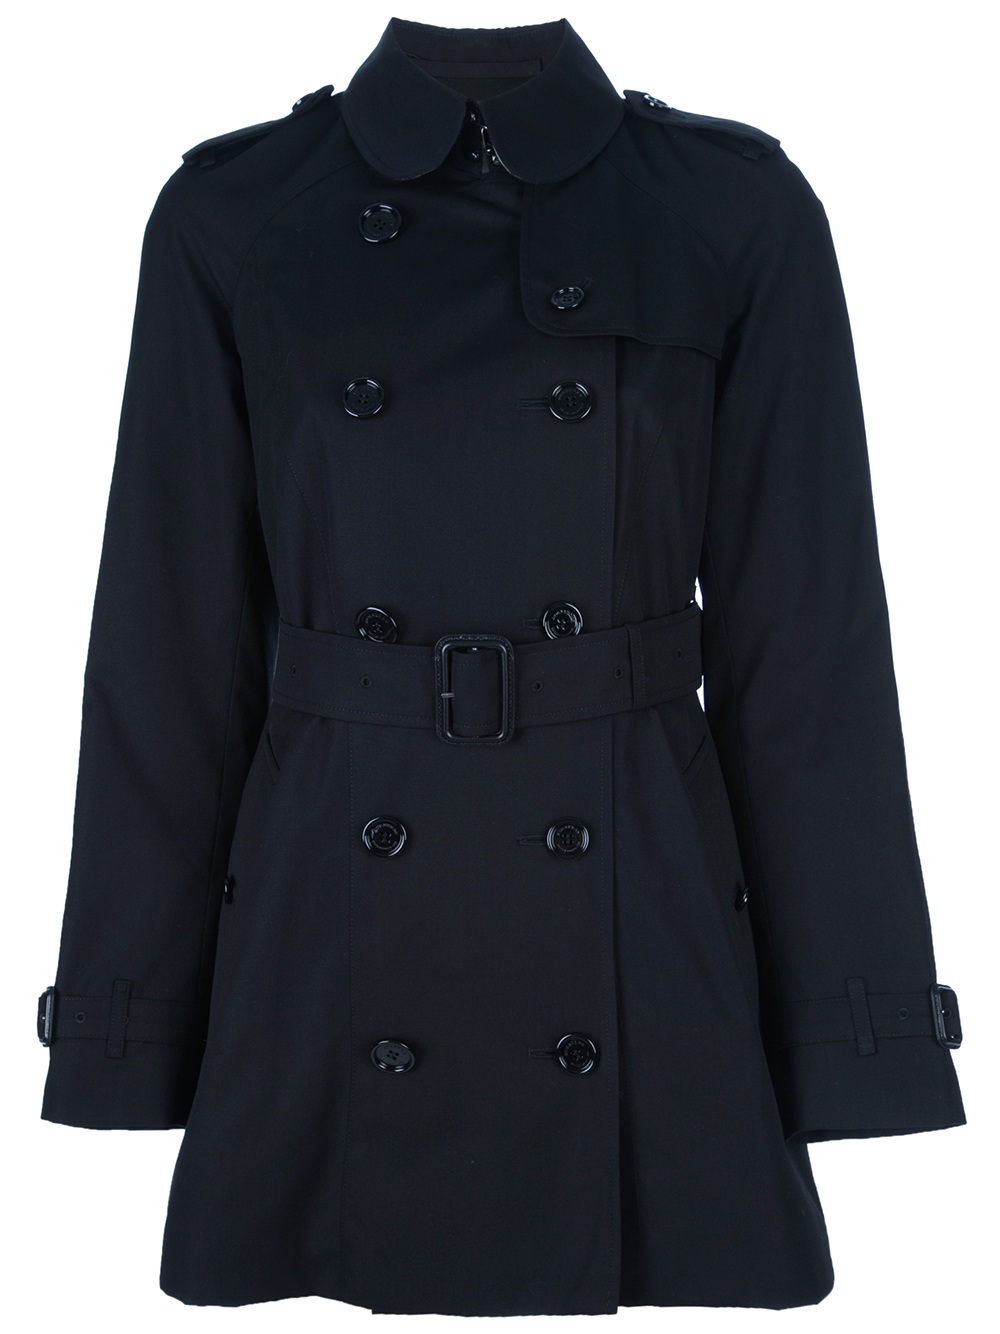 Burberry Double Breasted Belted Trench Coat in Black | Lyst